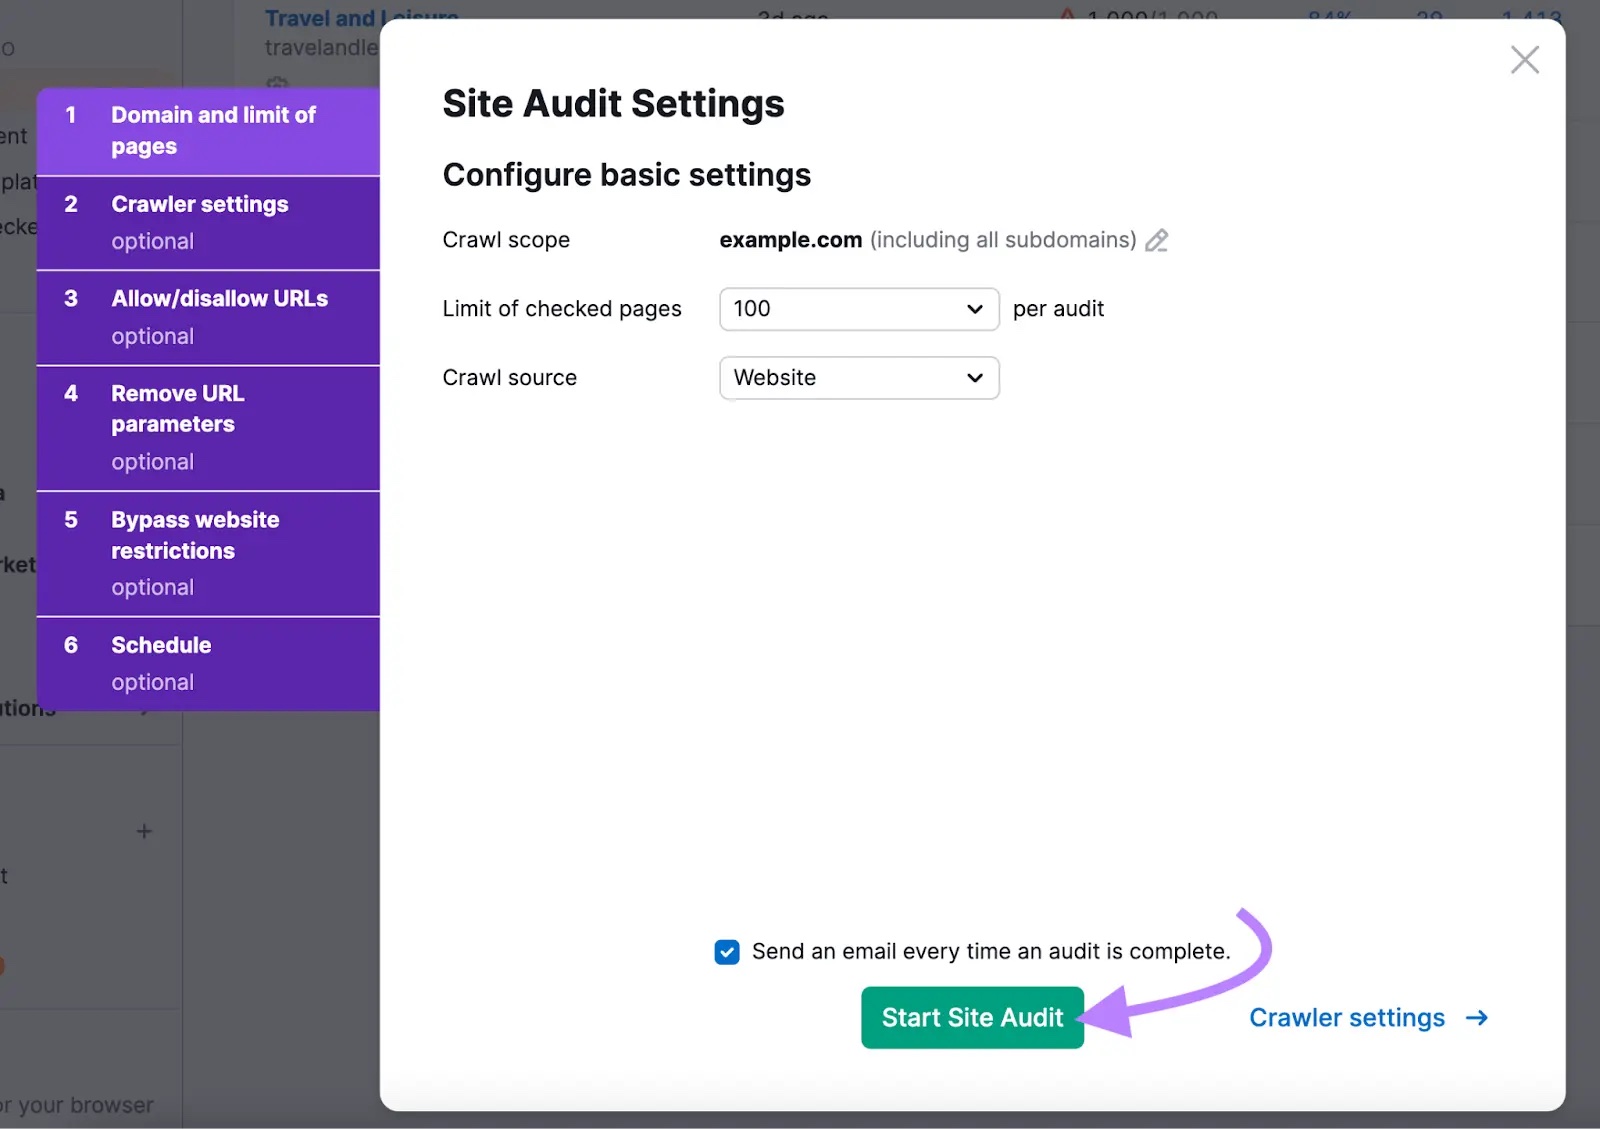 "Settings" page on "Site Audit" to configure crawl scope, source & page limit and the "Start Site Audit" button clicked.